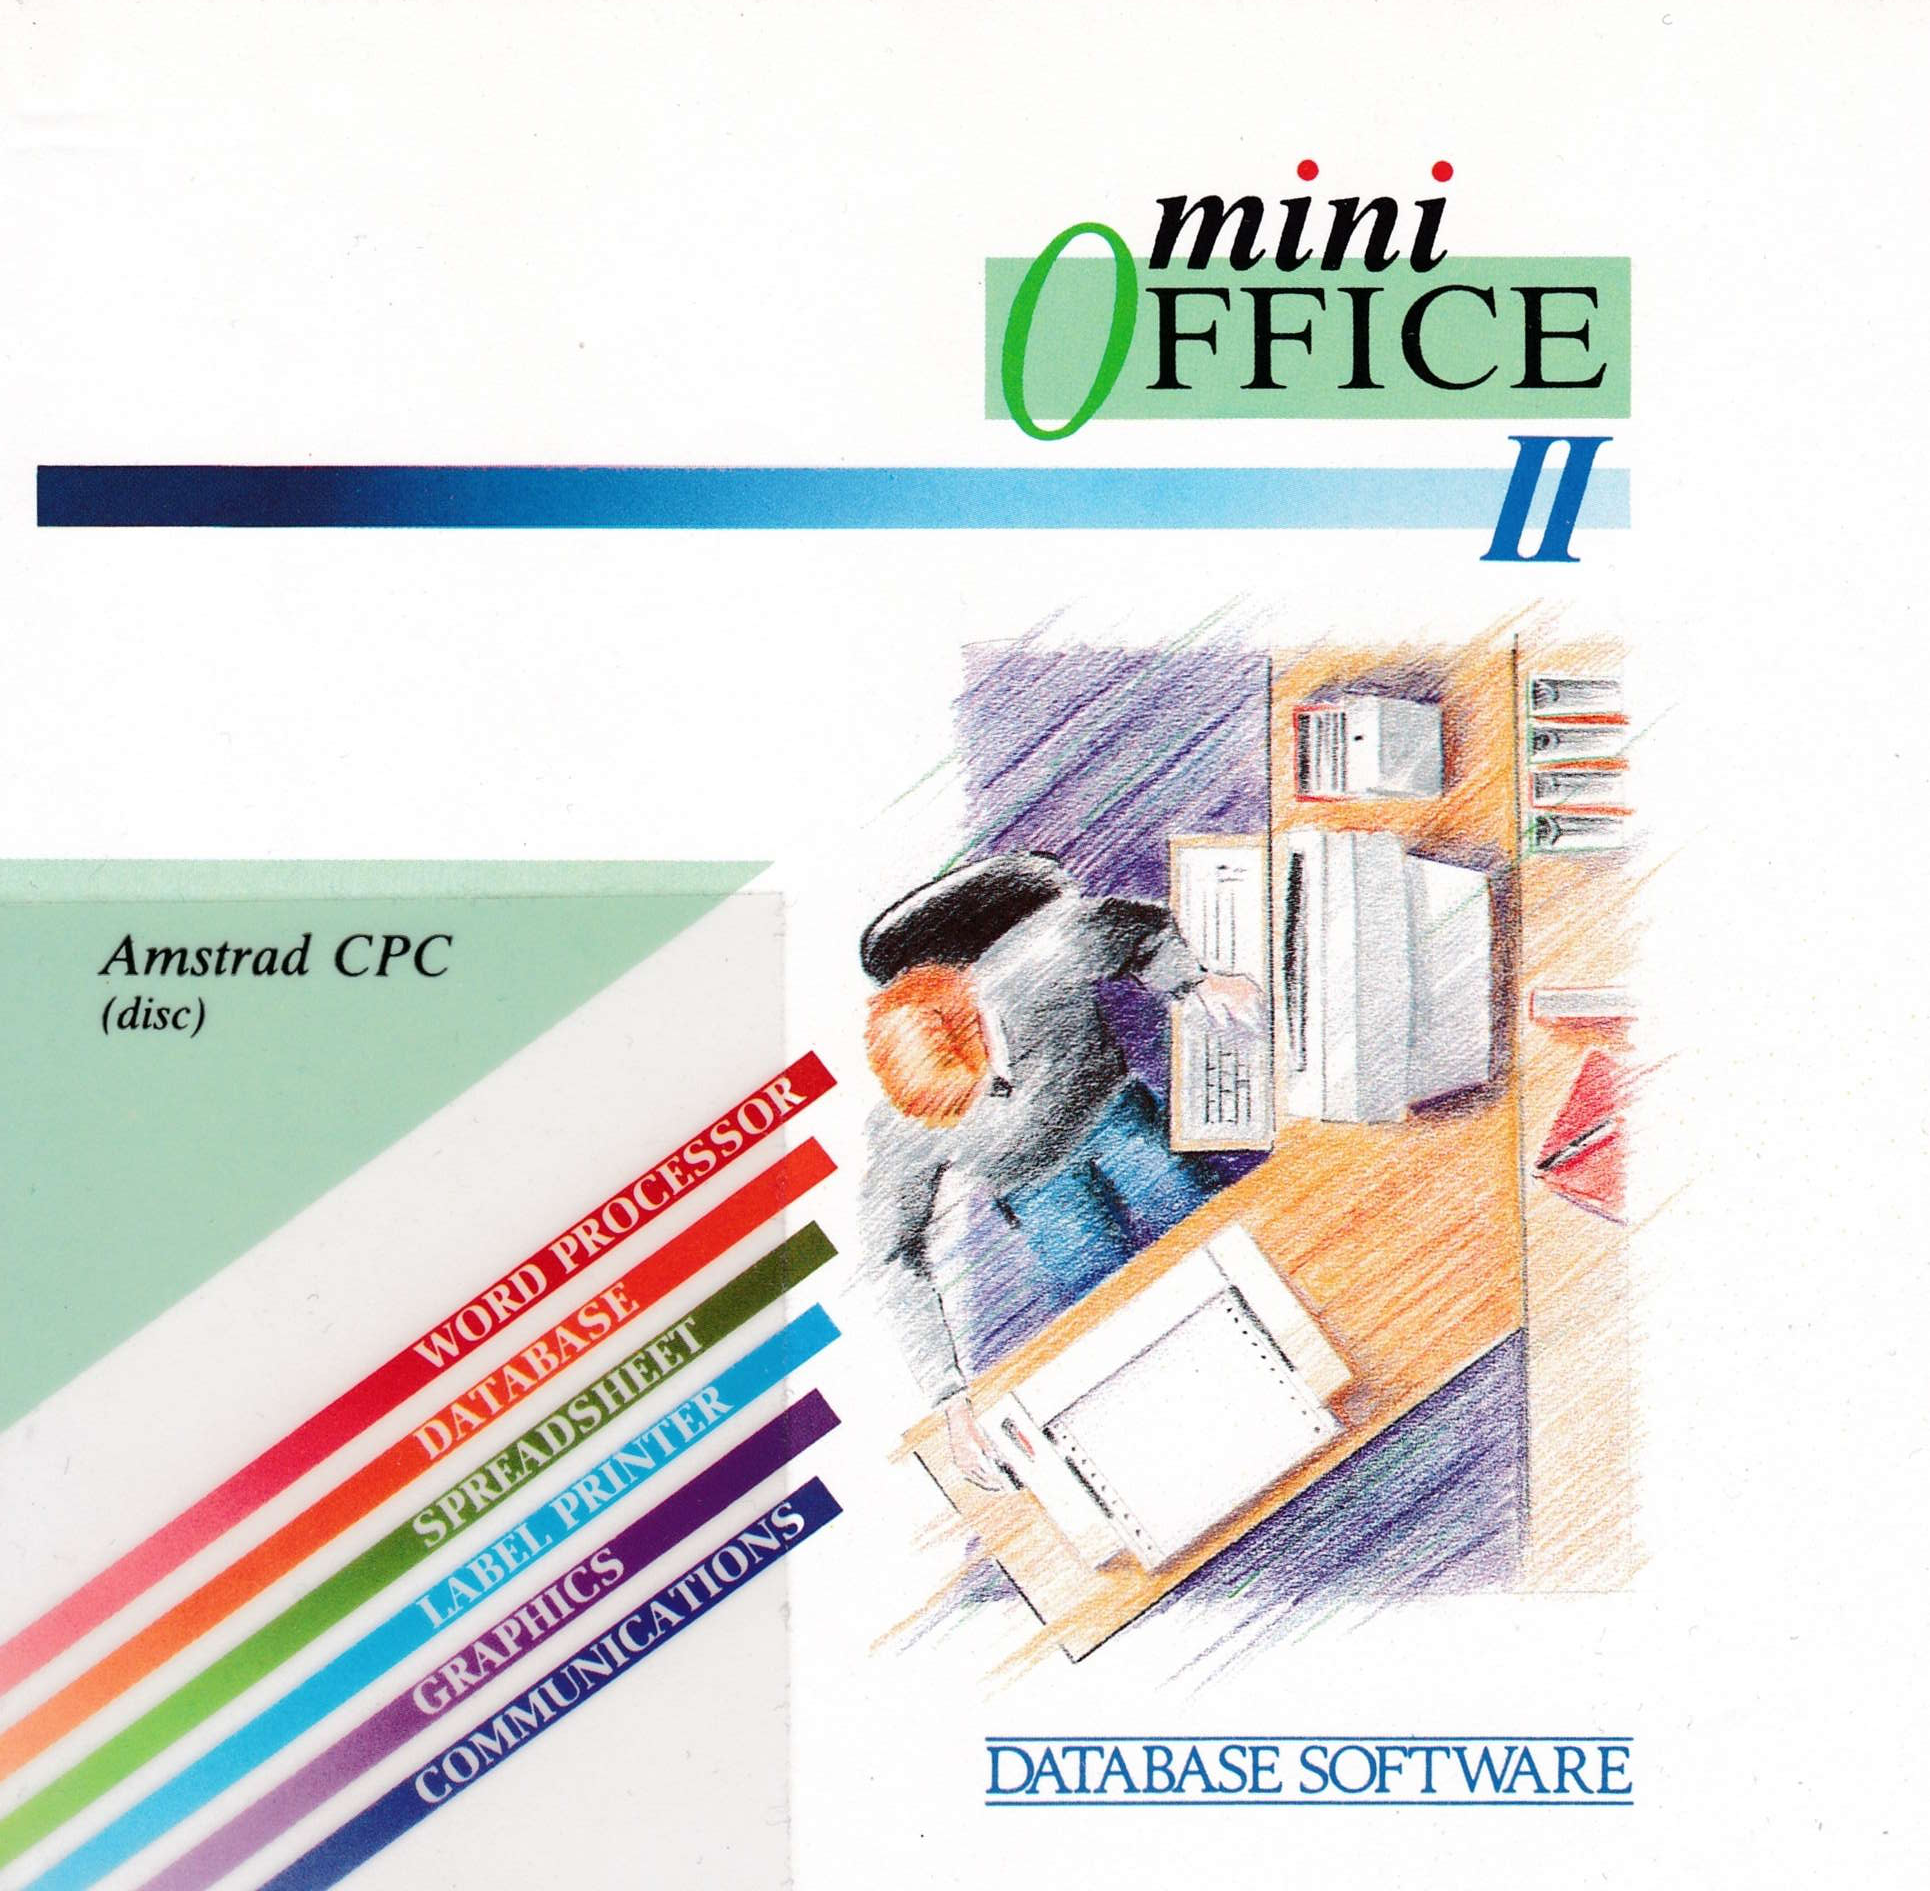 cover of the Amstrad CPC game Mini Office II  by GameBase CPC